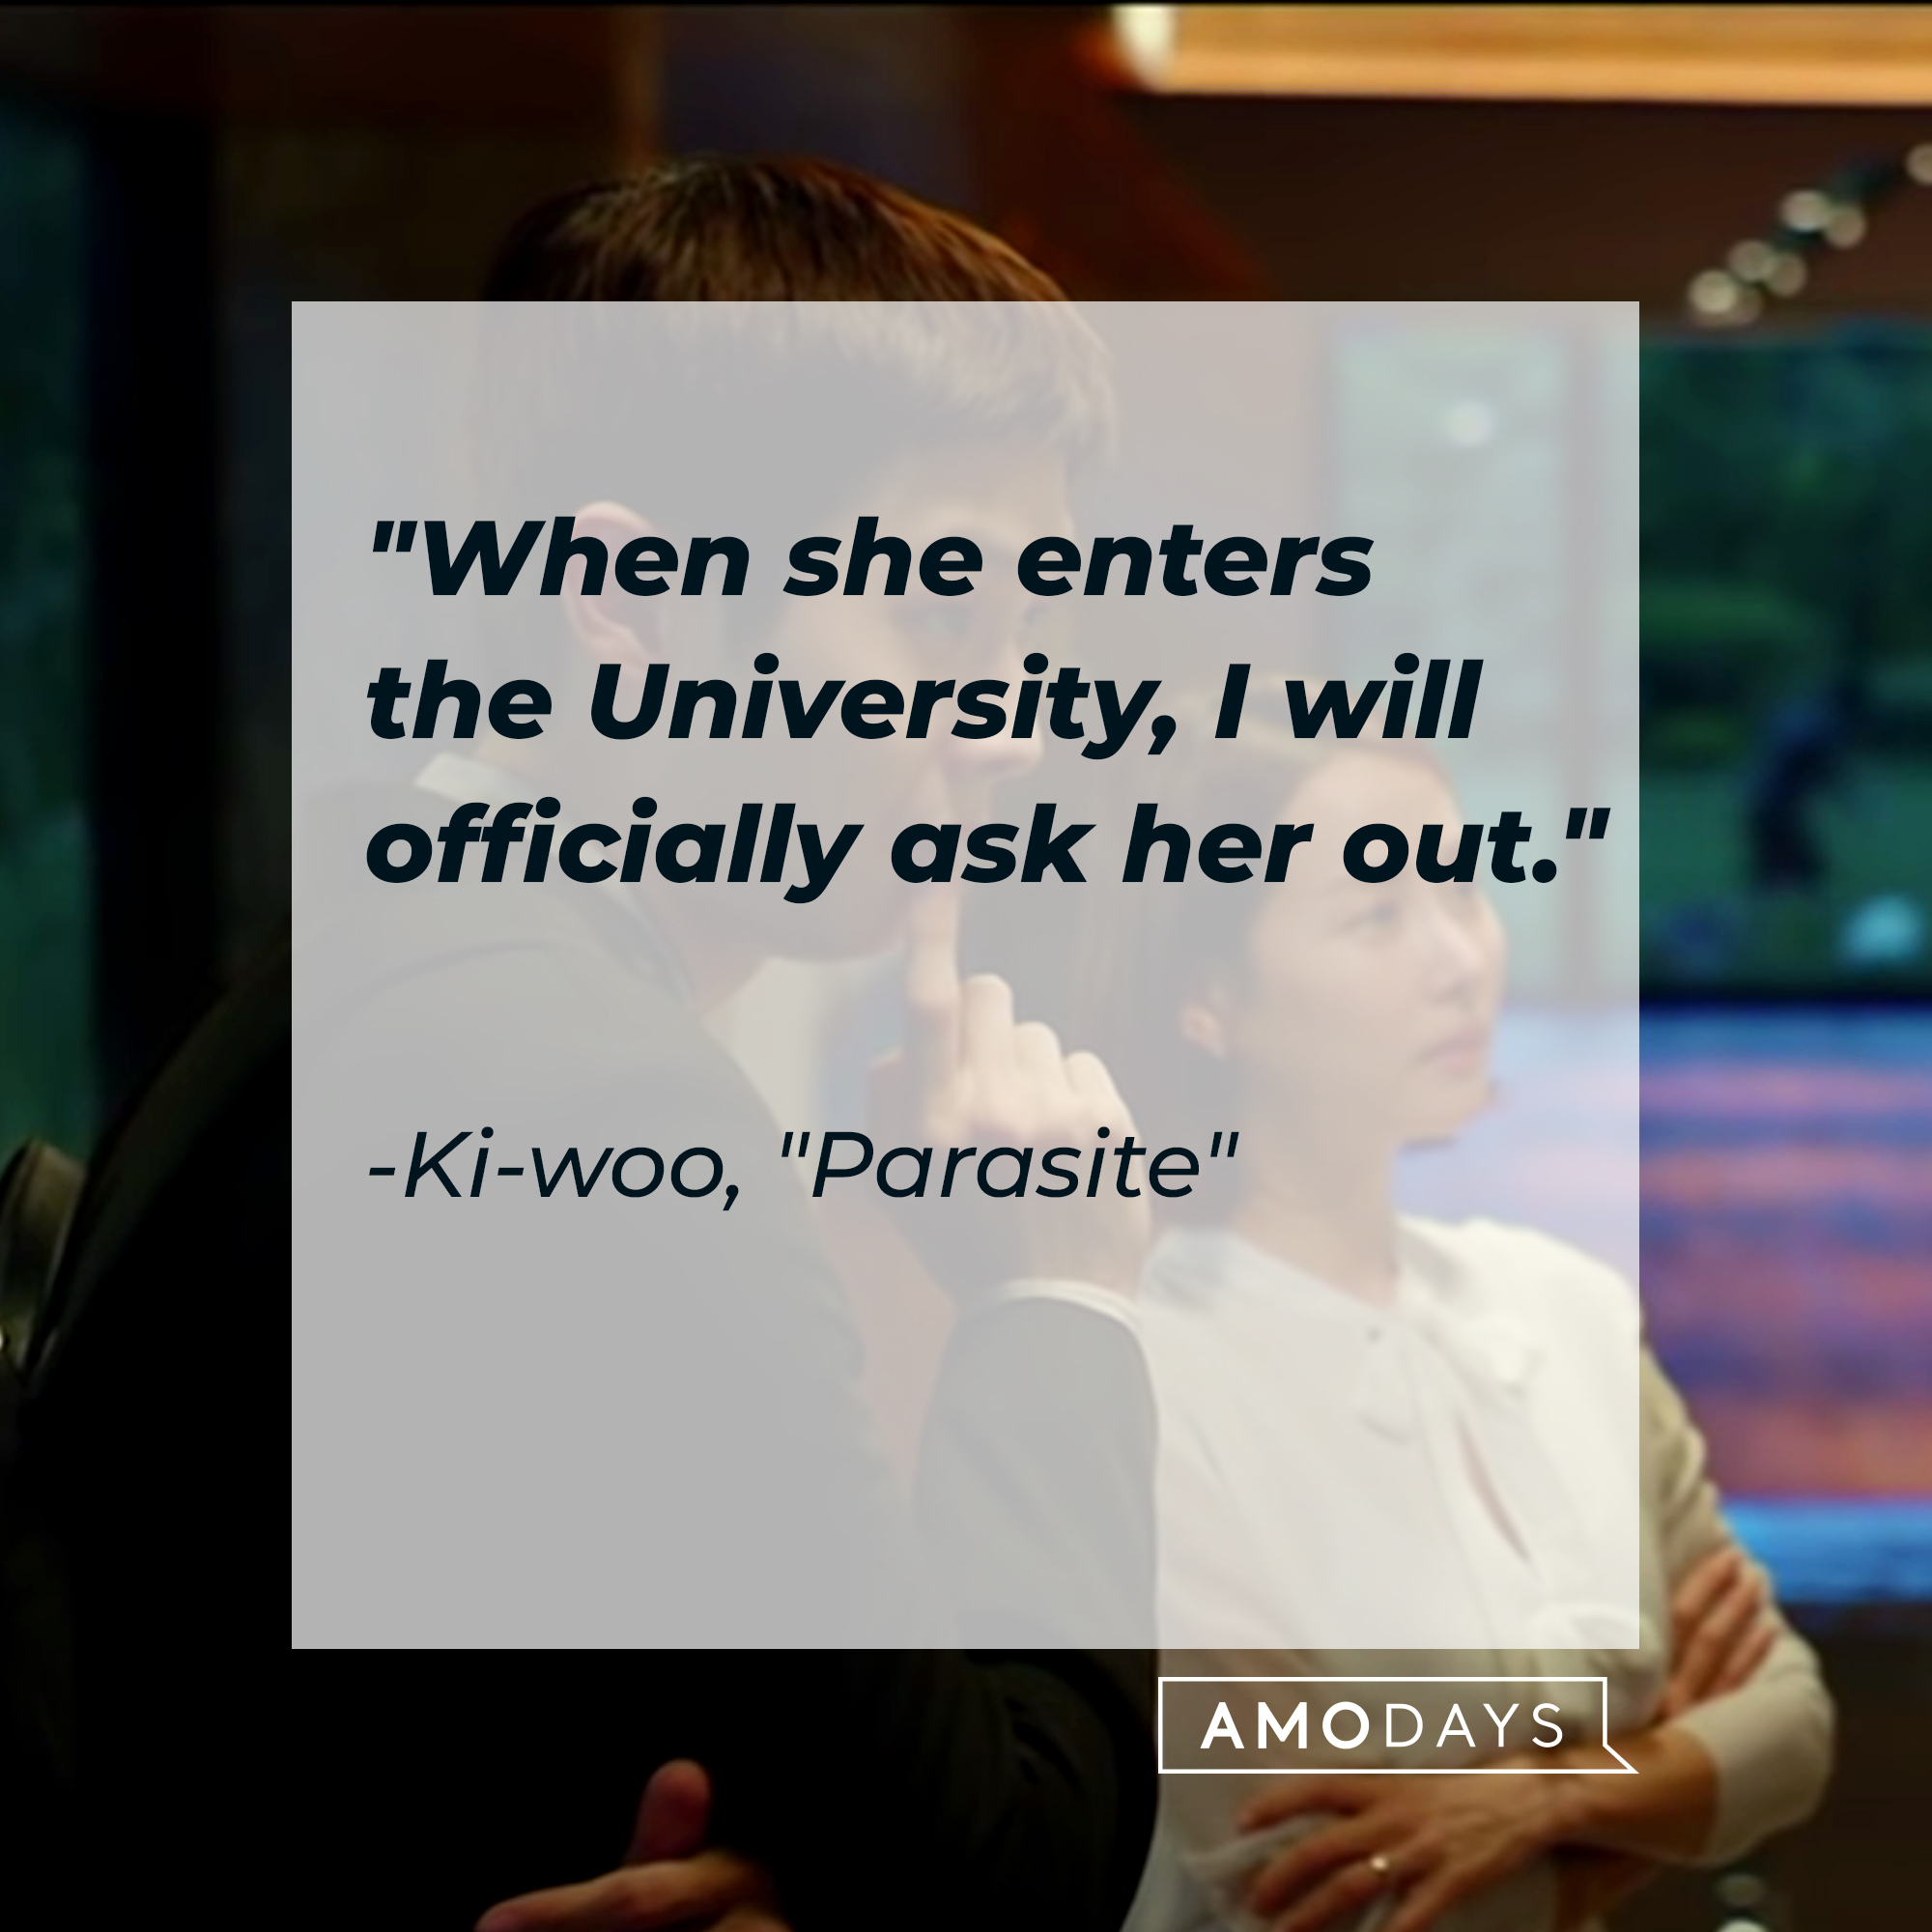 Ki-woo with his quote: "When she enters the University, I will officially ask her out."  | Source: Facebook.com/ParasiteMovie